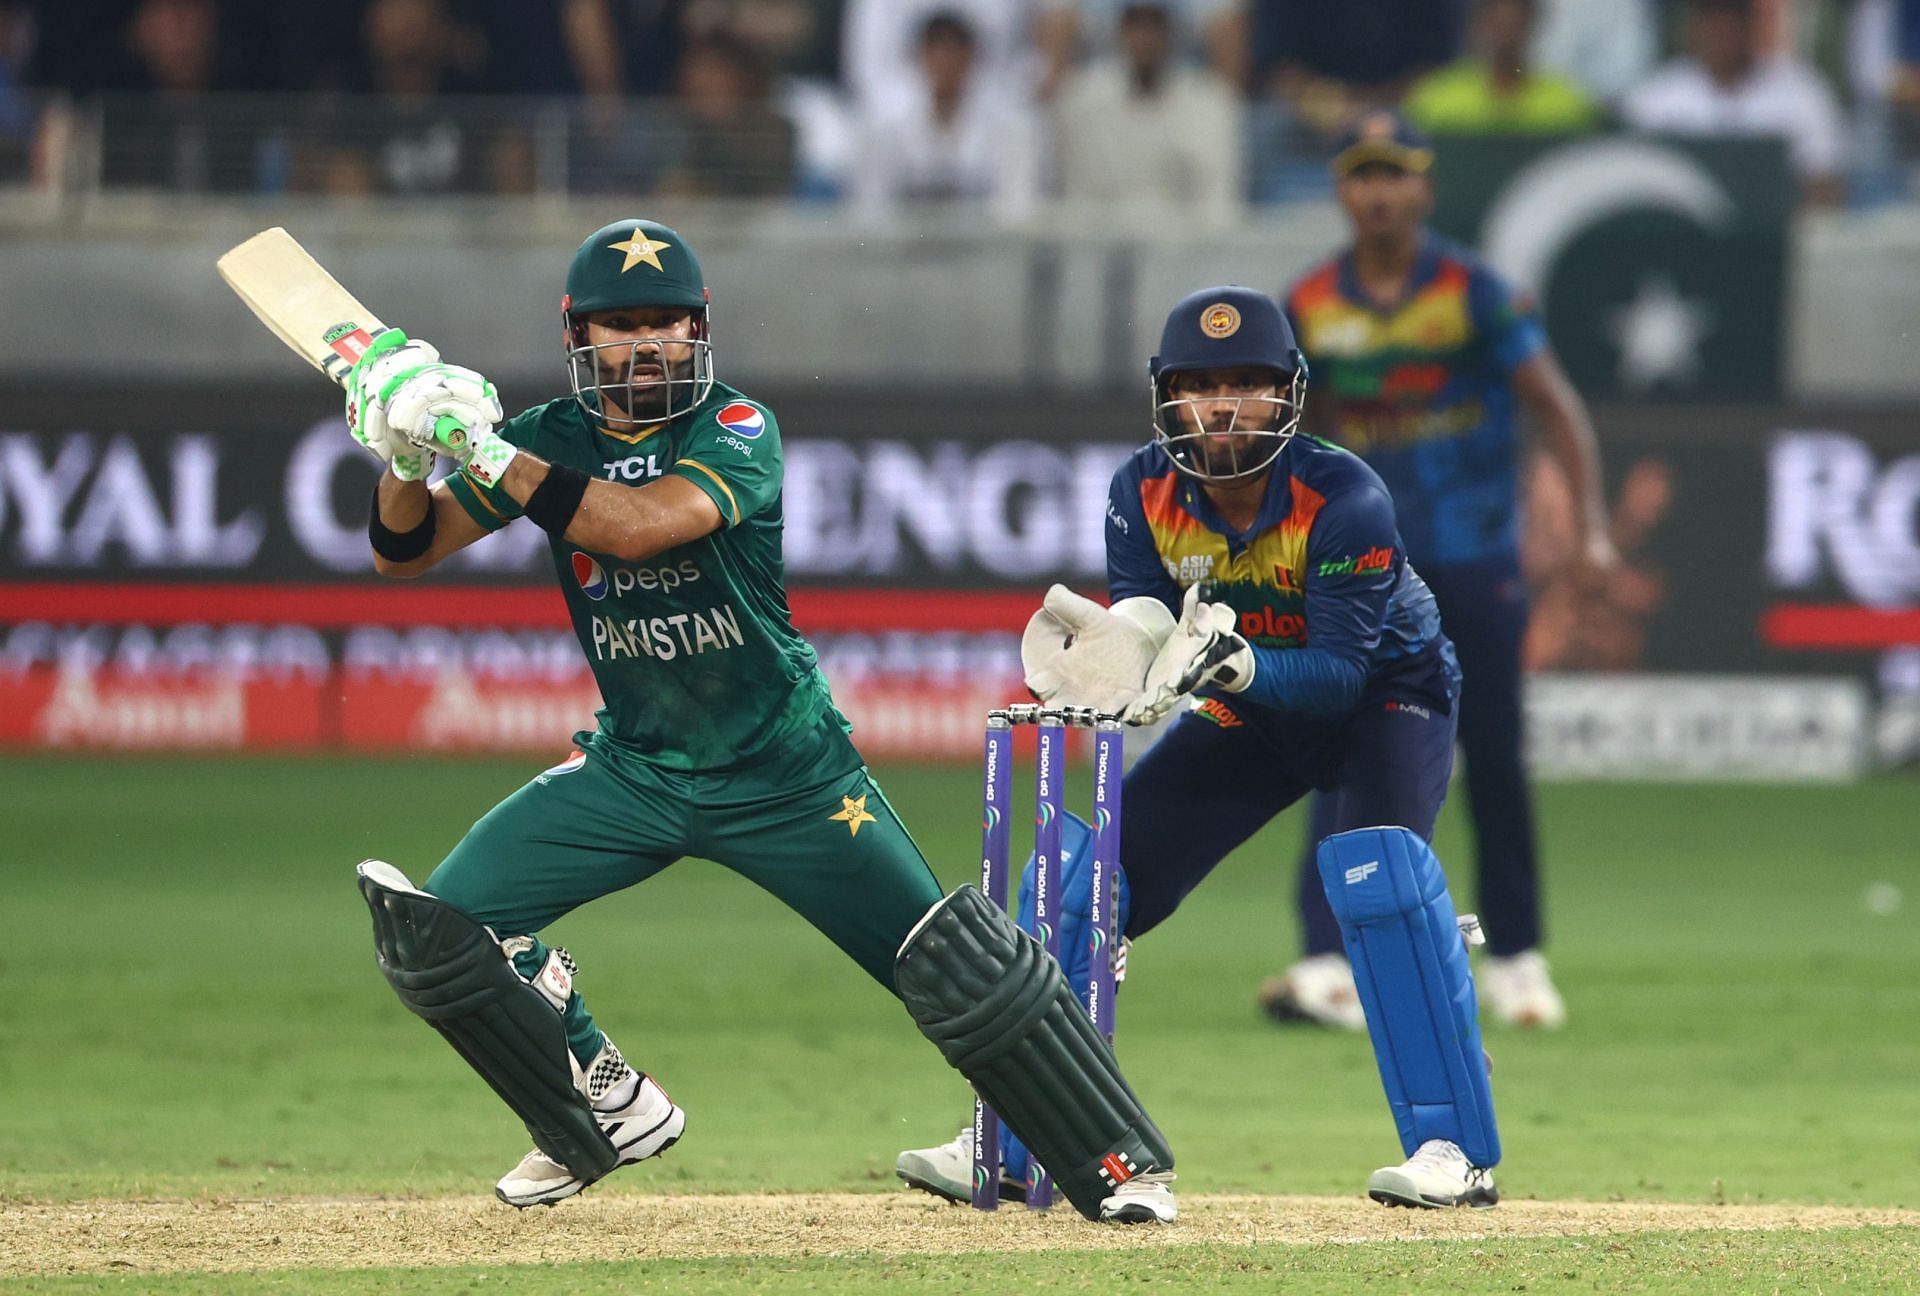 Pak Vs Sl Head To Head Stats And Records You Need To Know Before